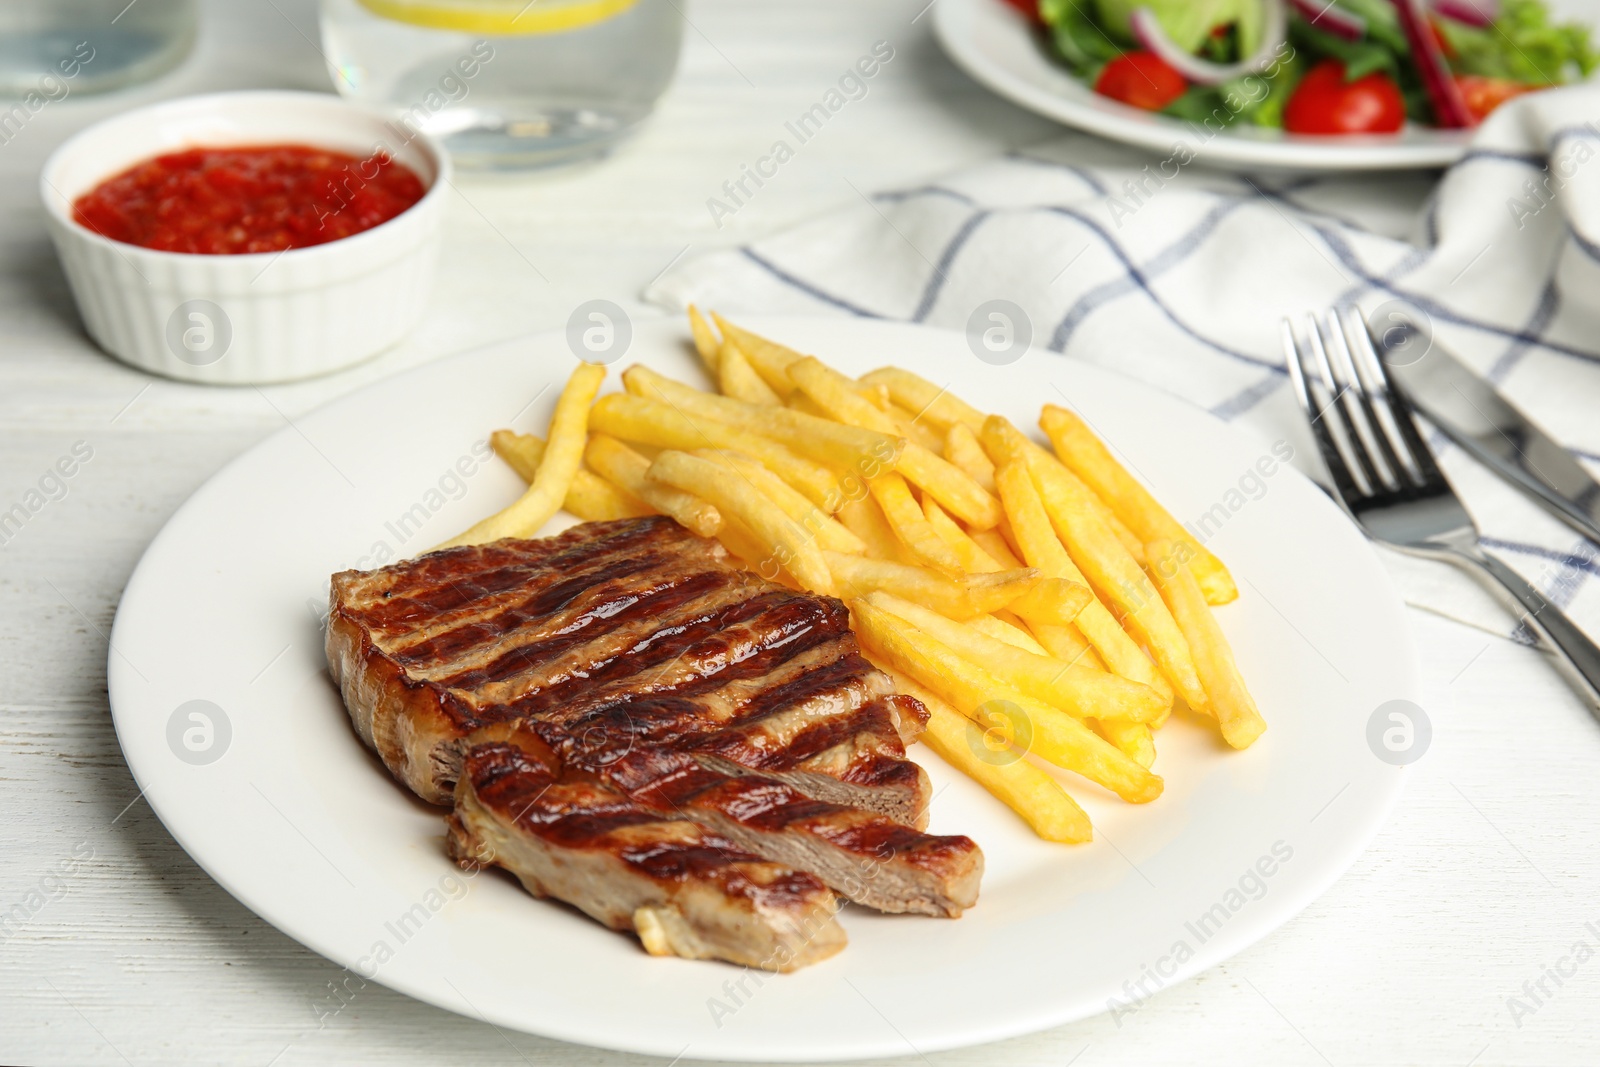 Image of Grilled steak with French fries on white table